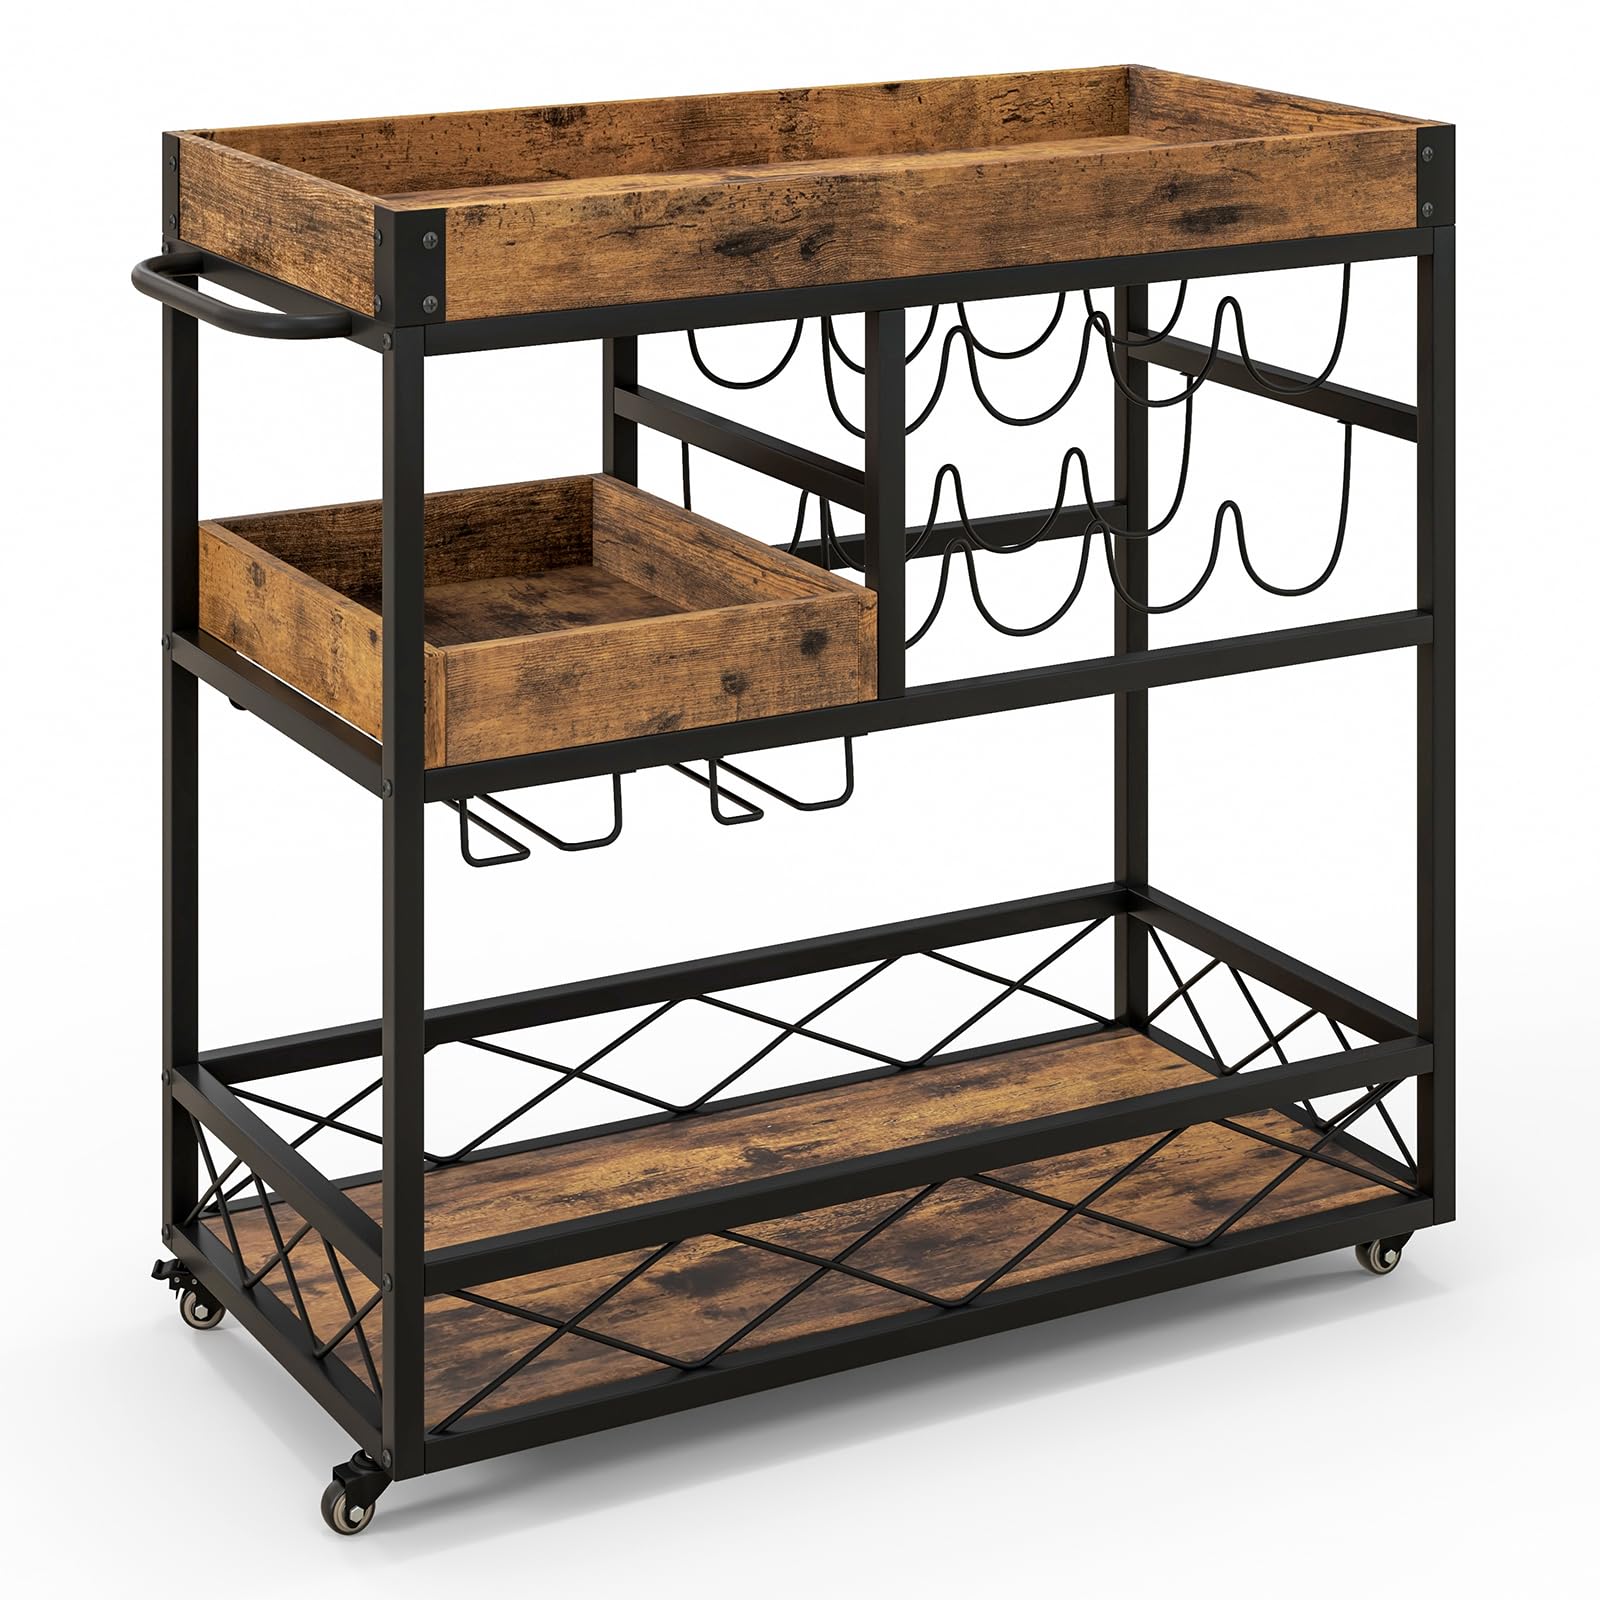 Giantex Home Bar Serving Cart, 3-Tier Rolling Bar Cart with Removable Tray, Wine Rack & Glass Holder, Rustic Brown